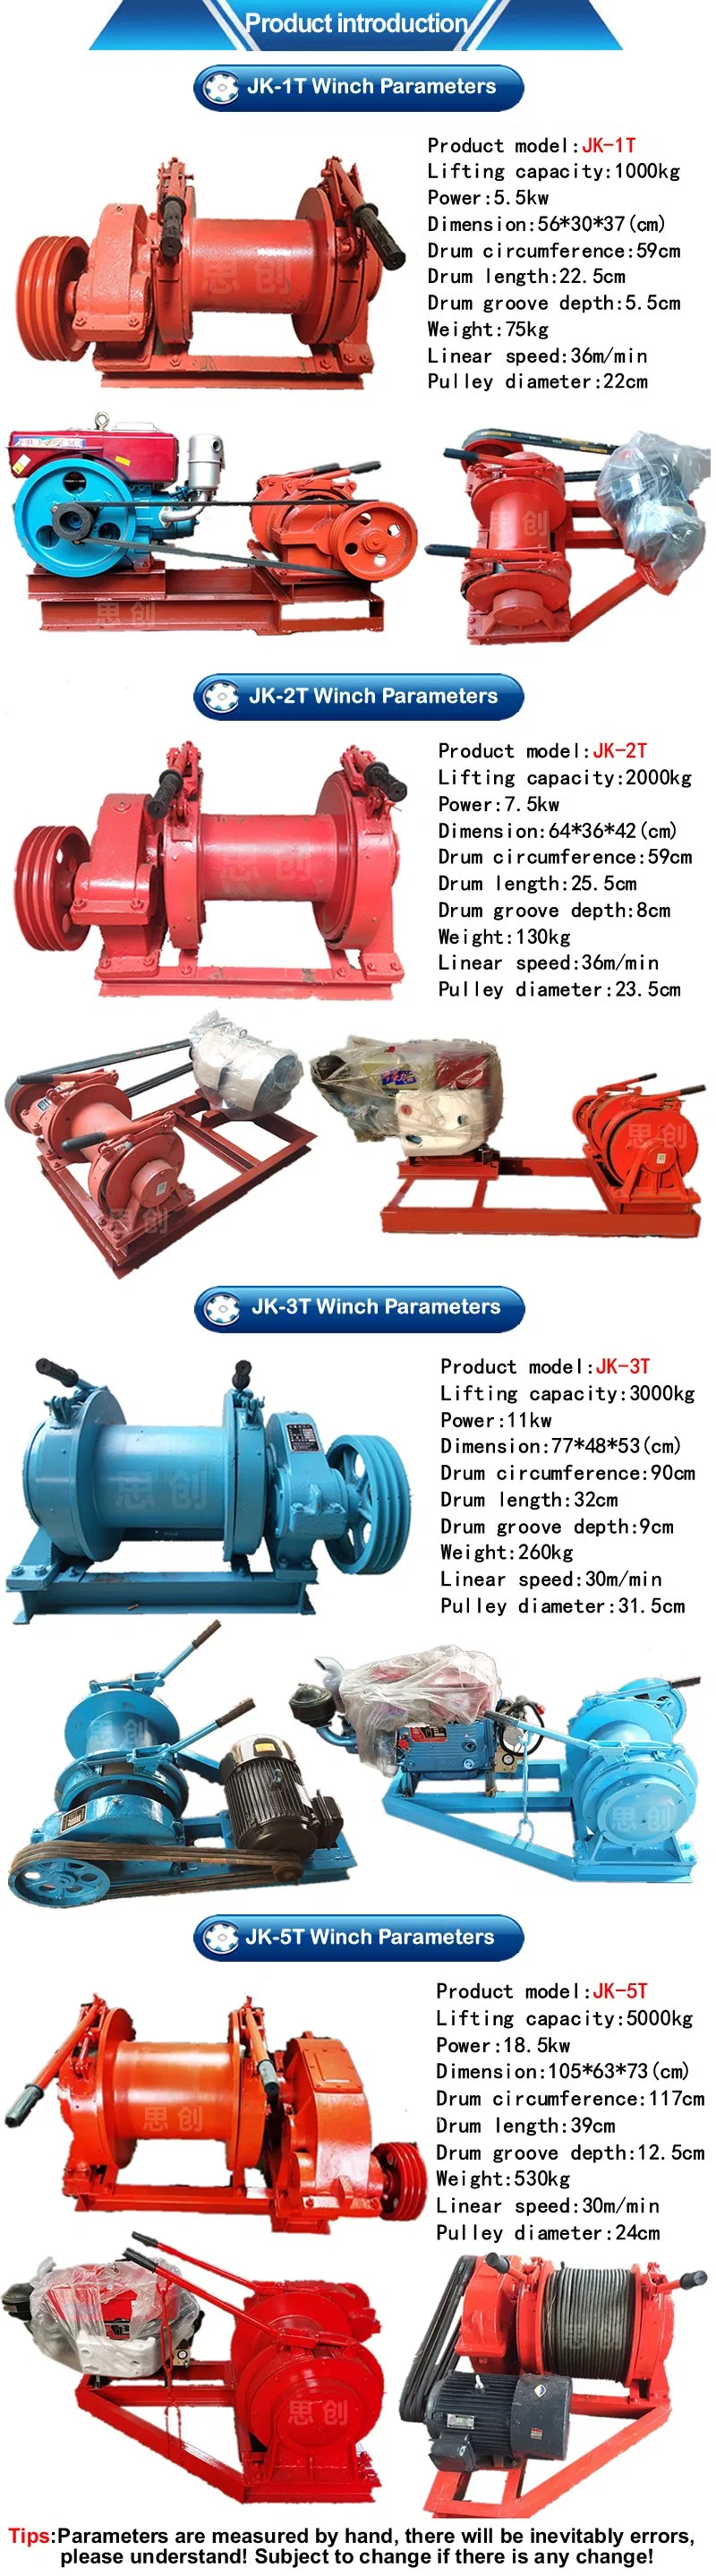 Small Winch 1 Ton 2 Ton Hydraulic Winch for Lift and Drag Goods